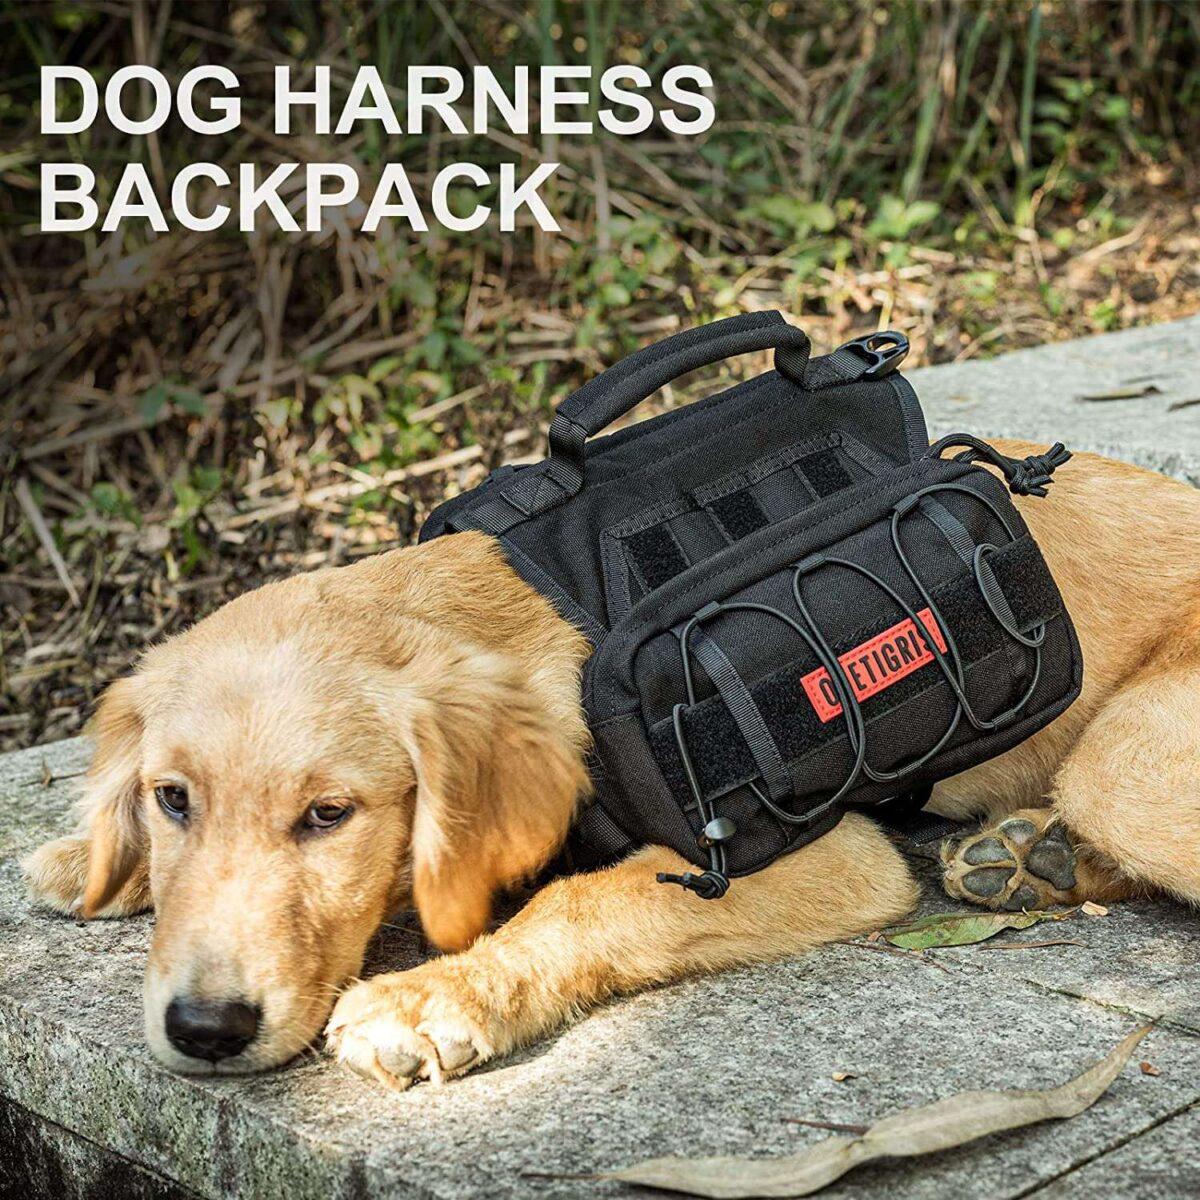 The Best Backpacks For Dogs -Top 5 best dog backpack